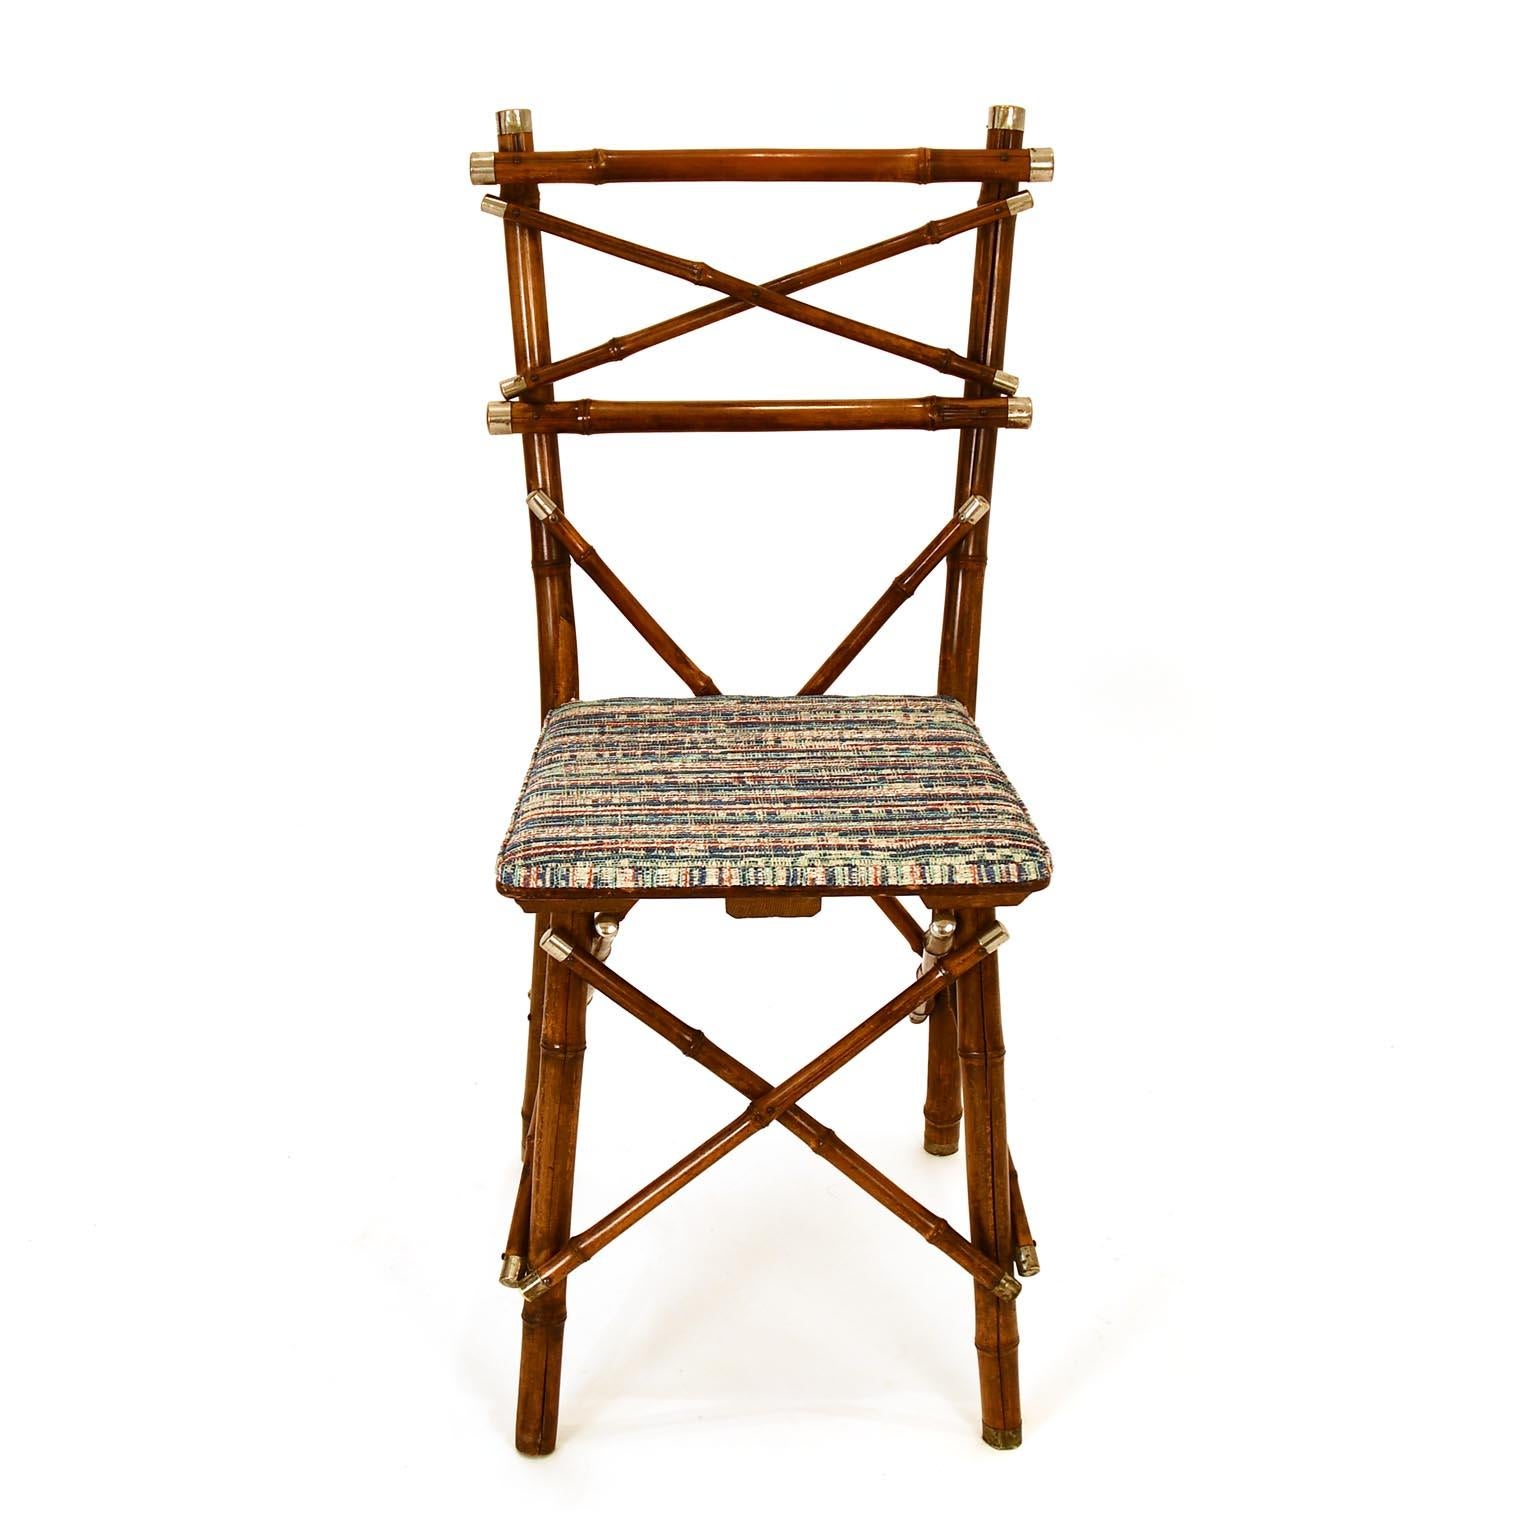 A decorative bamboo chair which was made in Vienna circa 1920 by J. Kothgassner - Bambus & Phantasie-Möbel, Gumpendorferstrasse 57.
The ends of the bamboo rods have a nickel plated brass cup. The chair has 1 missing cup at the feet.
It is labeled